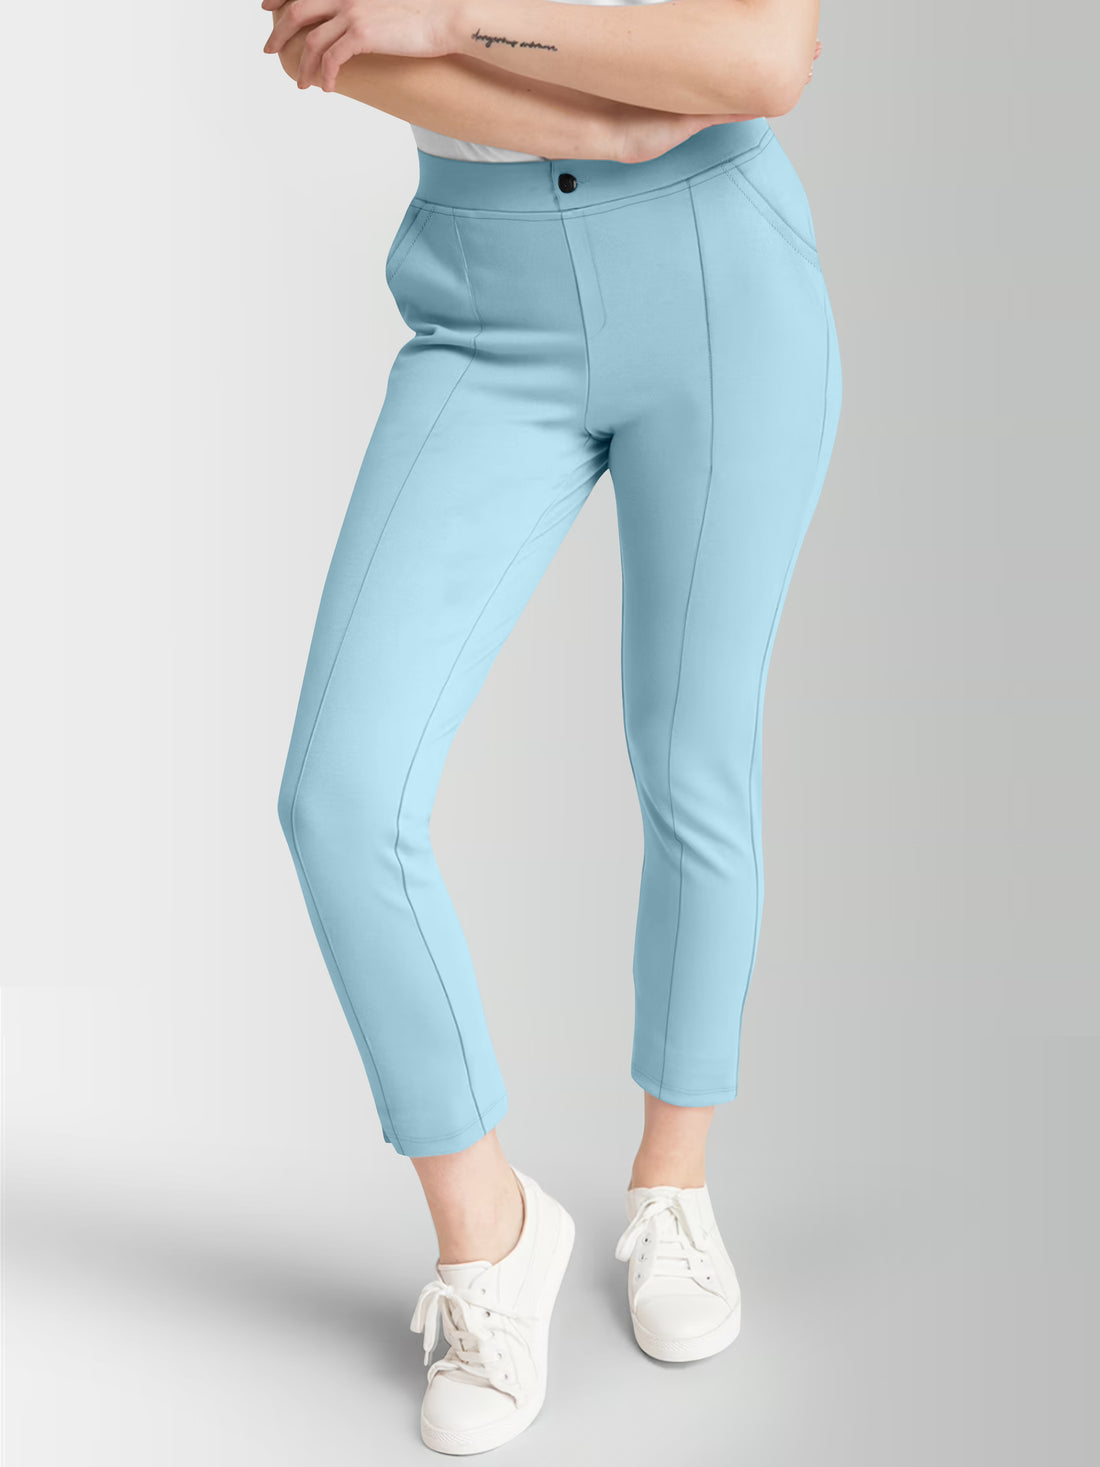 Women's Sky Skinny Fit High Rise Clean Look Regular Length Stretchable Trouser.Track Pant.Jogger.Pant.Body Fit Pent.Formal Trouser.